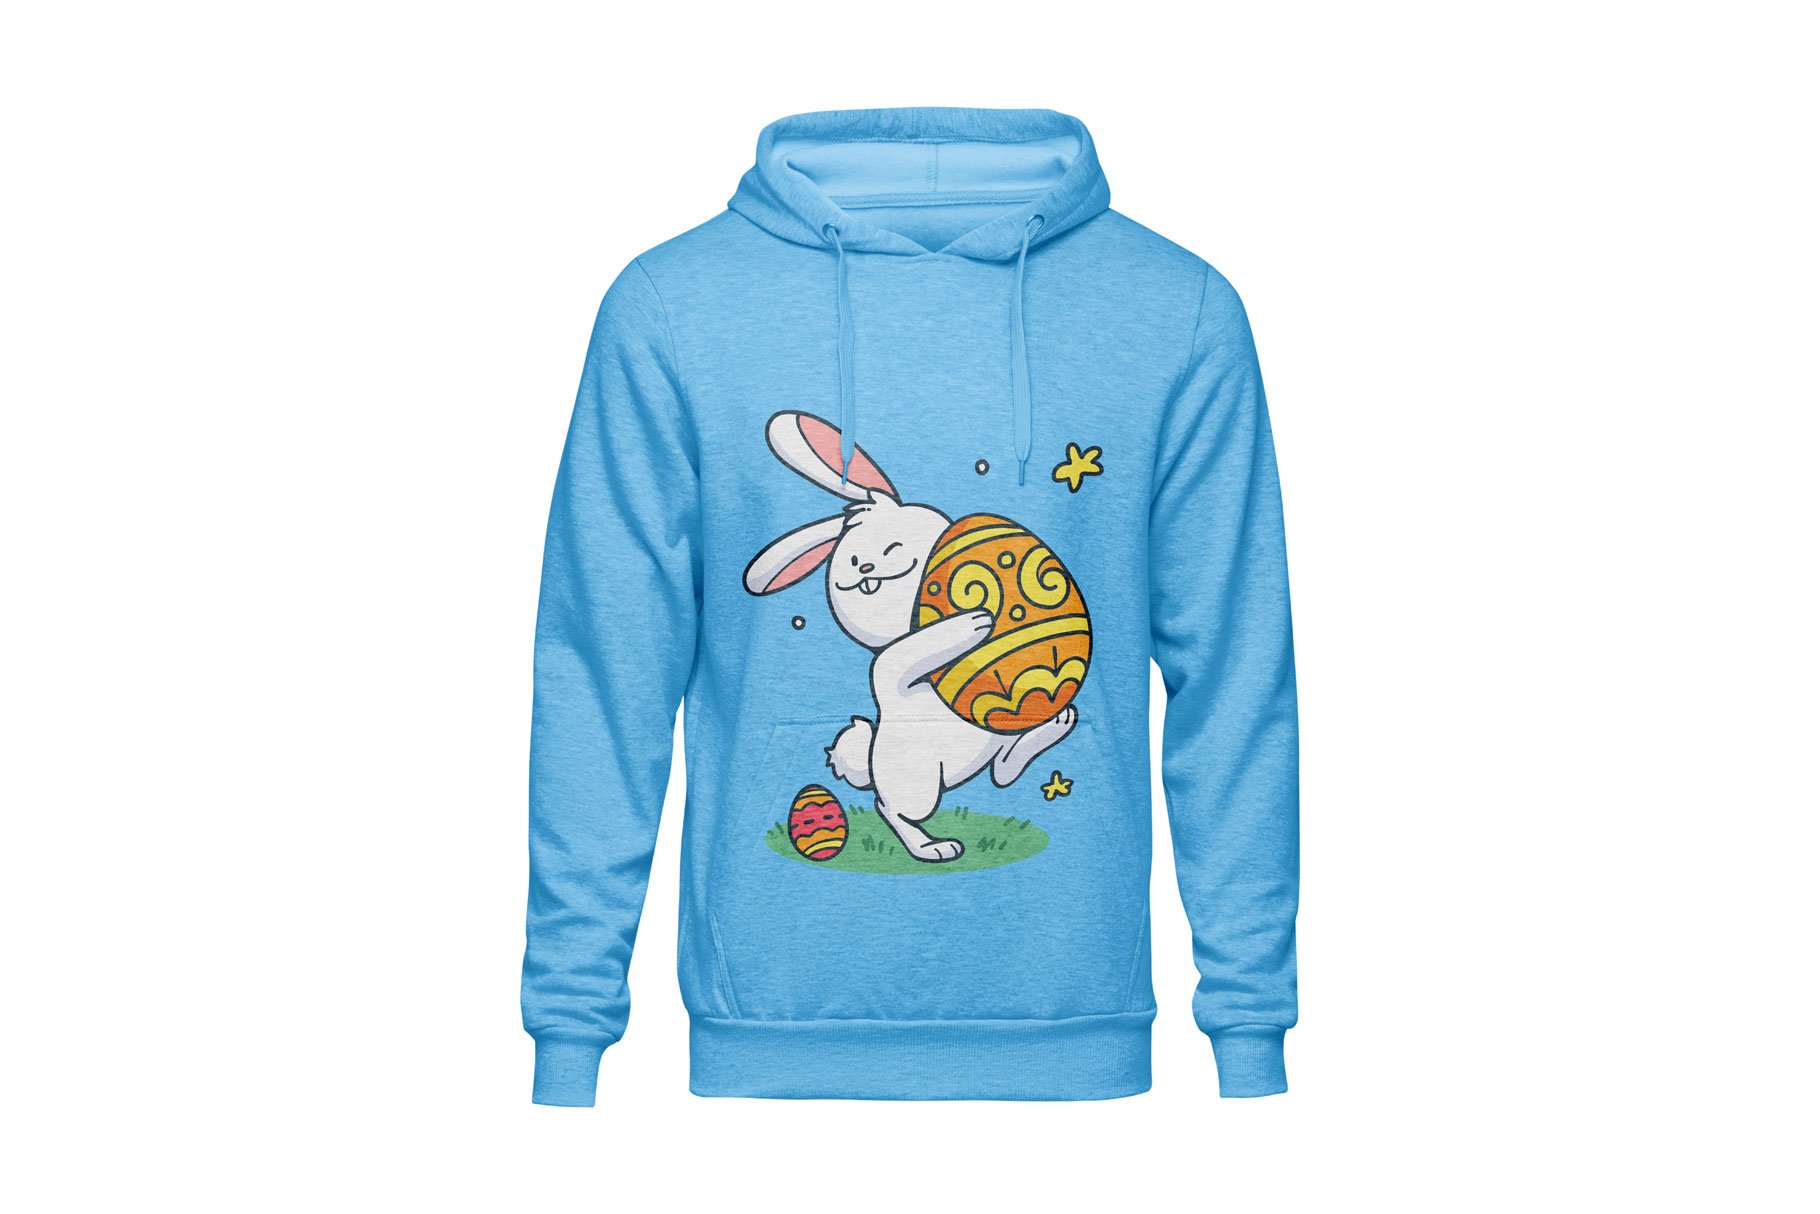 Hoodie Mockup - Front View preview image.